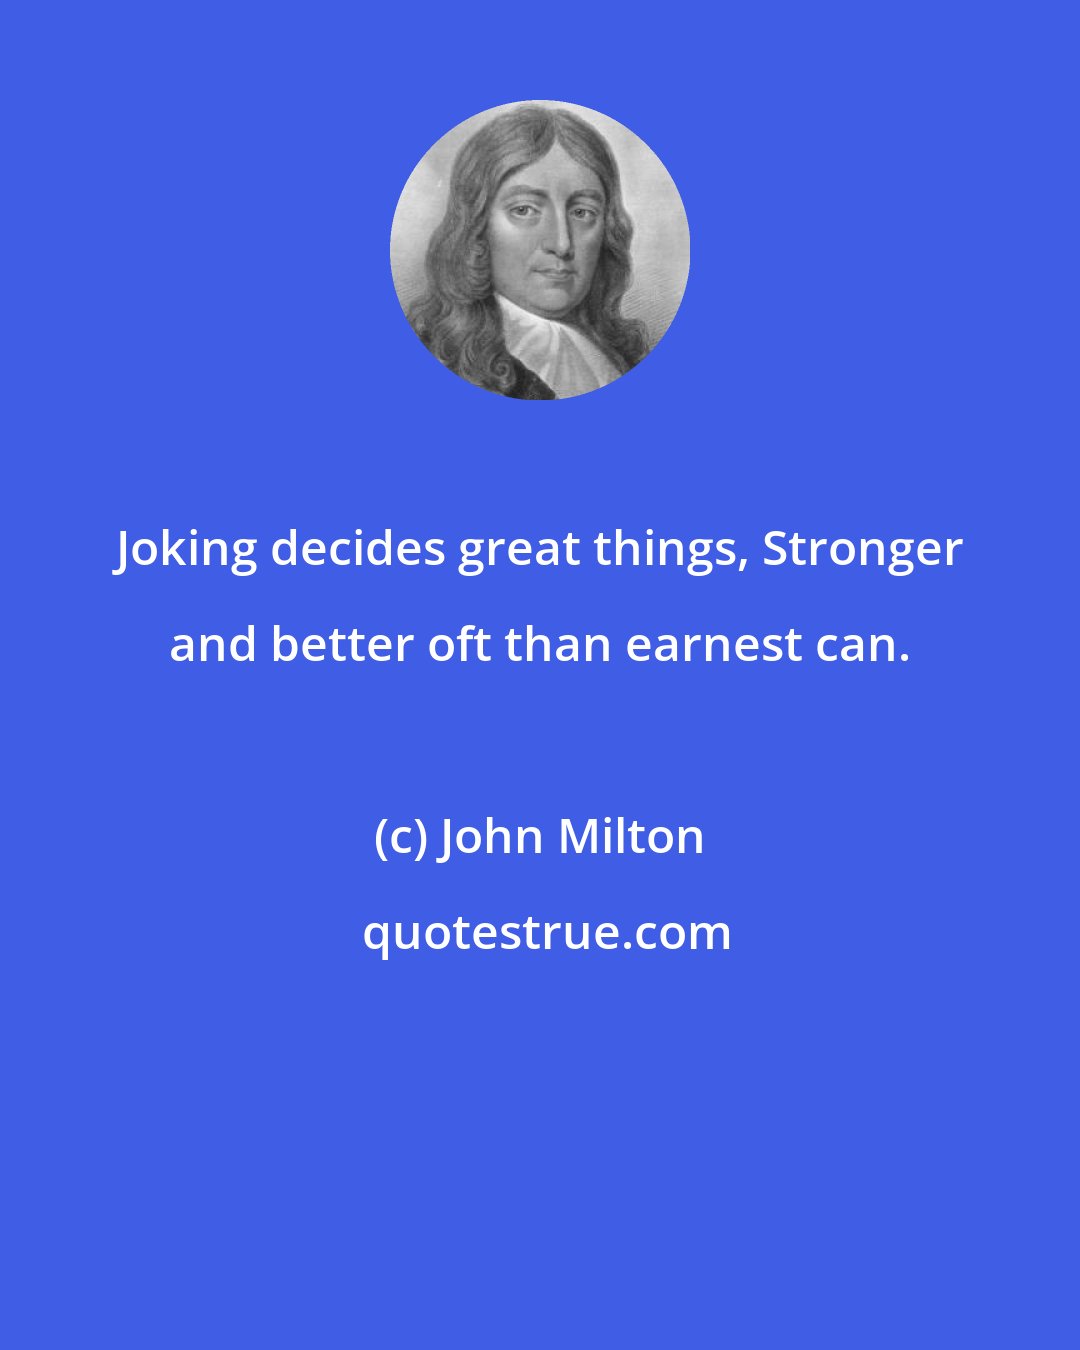 John Milton: Joking decides great things, Stronger and better oft than earnest can.